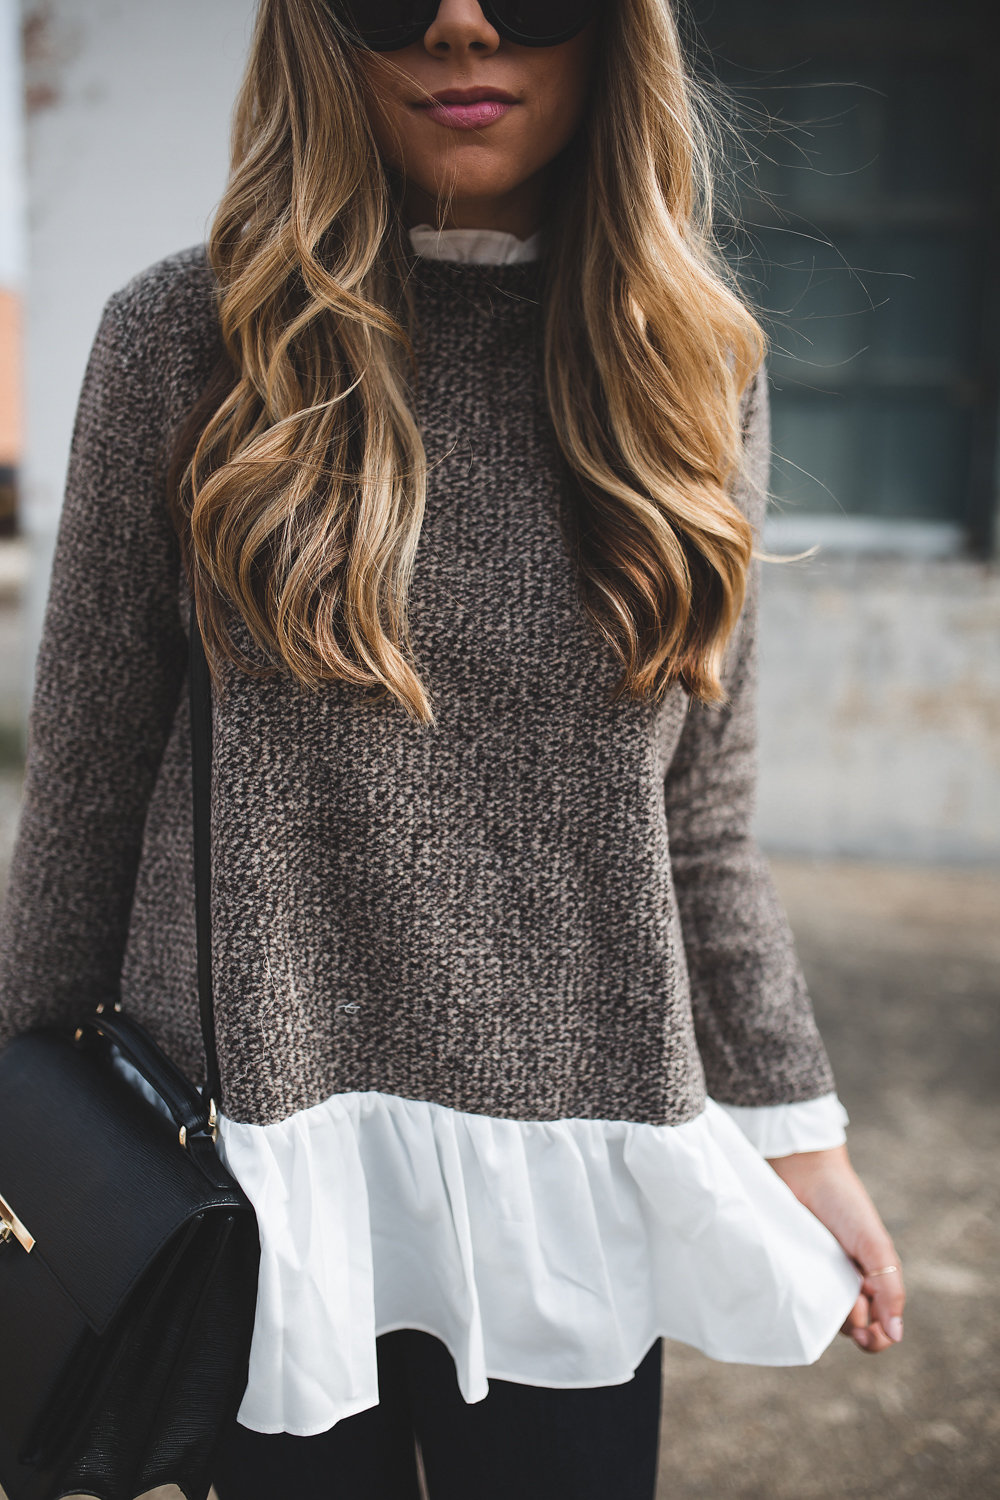 Layered Sweater That Fits Your $25 Budget